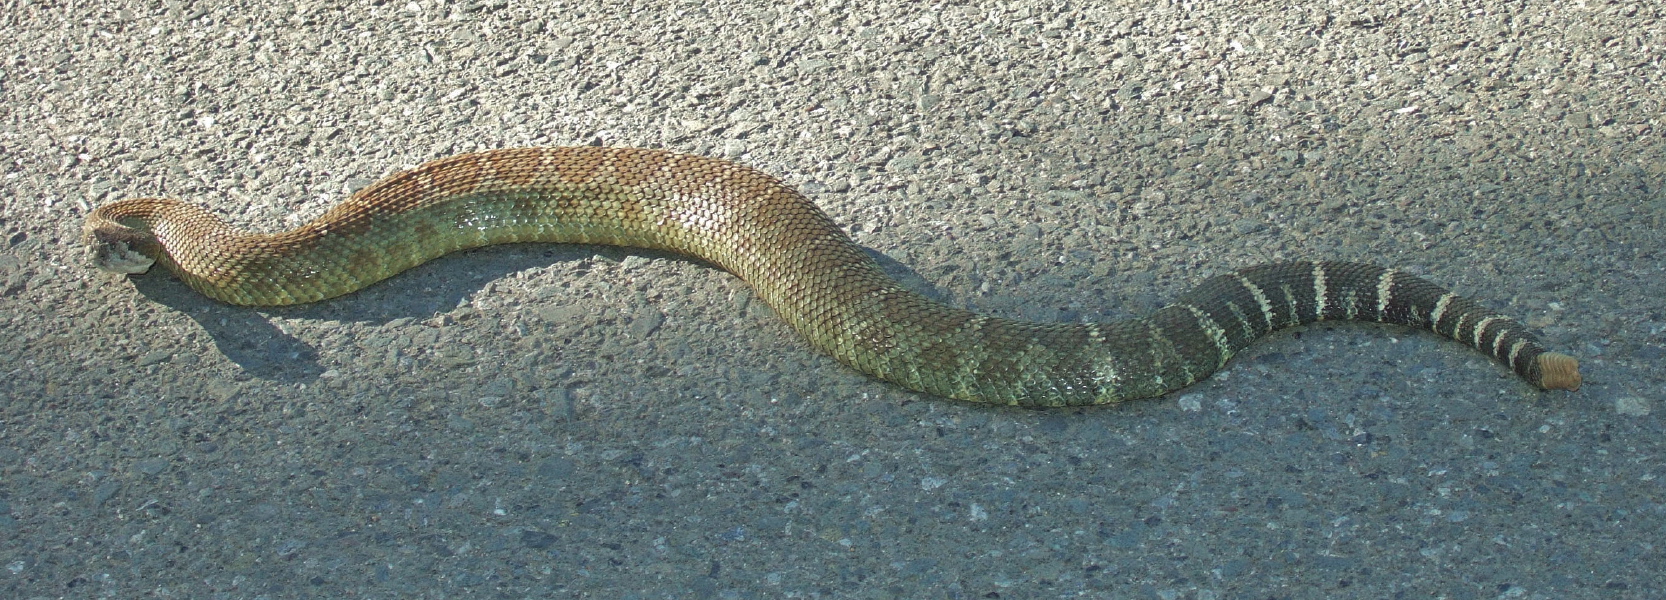 A plump rattler pauses to check me out as he crosses the road.